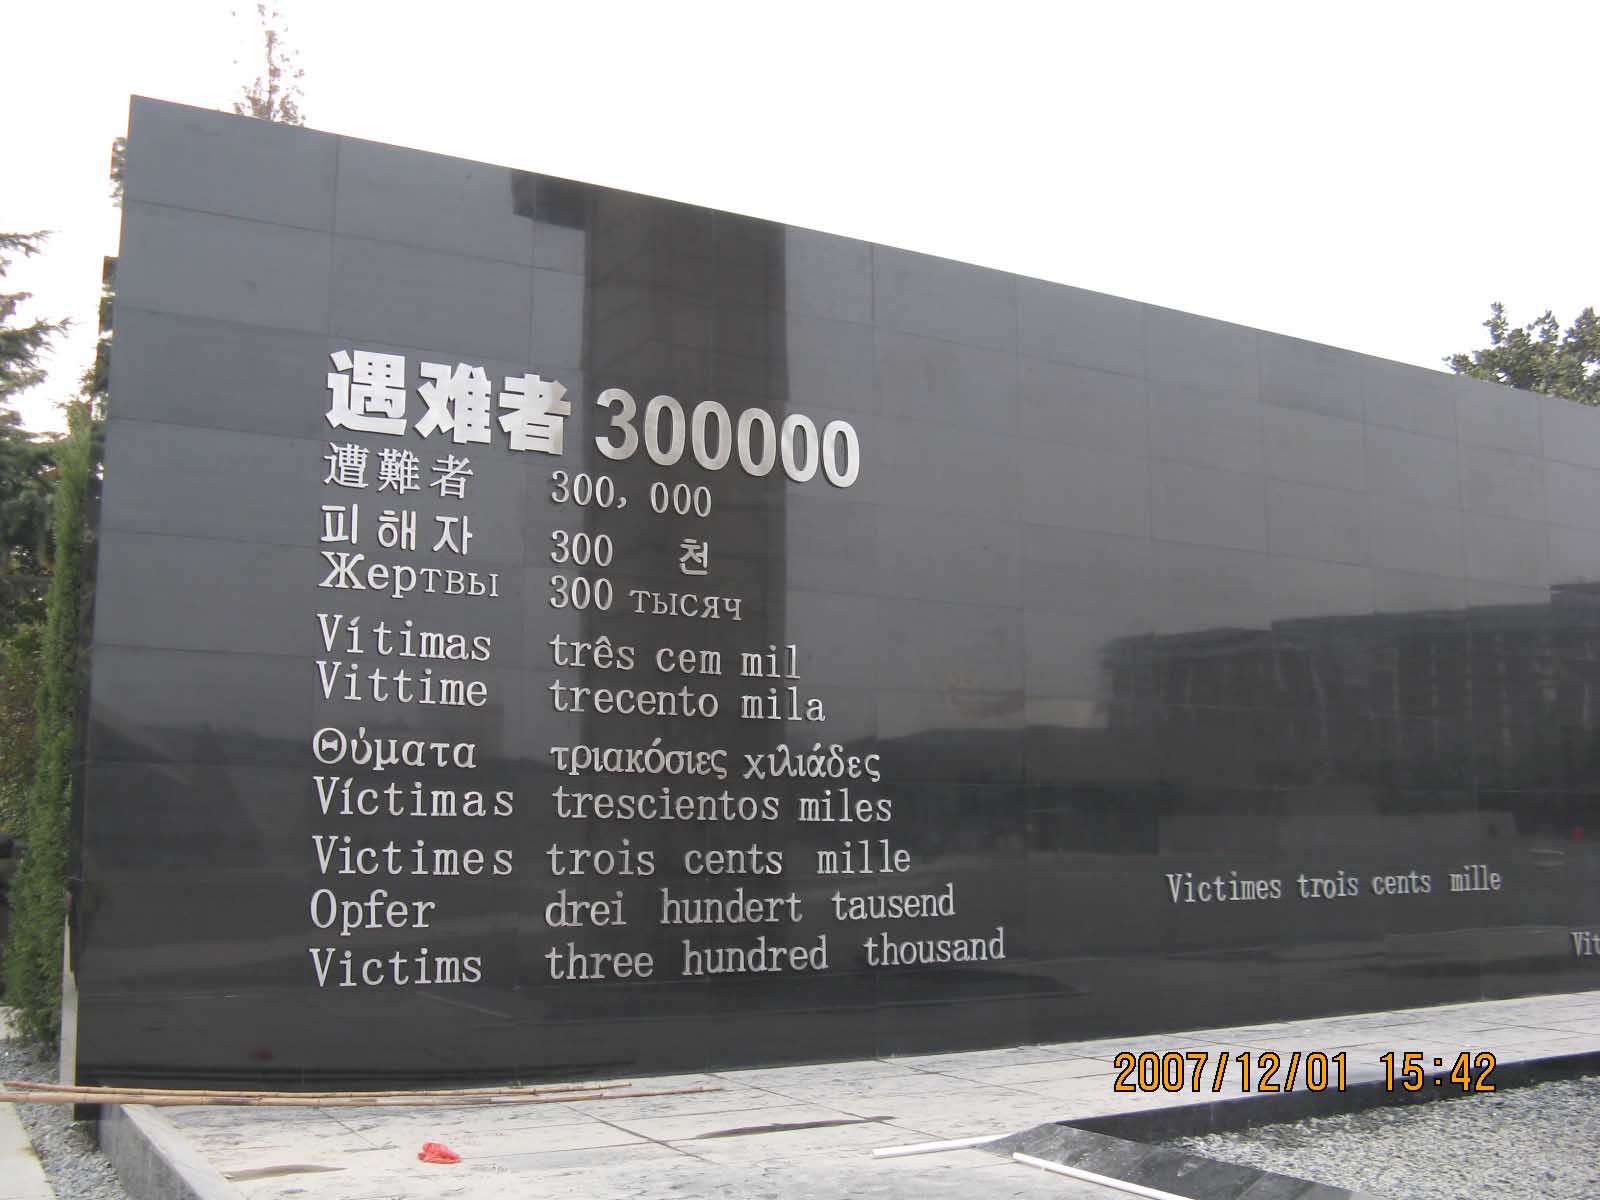 The Memorial Hall of the Victims in Nanjing Massacre by Japanese Invaders-0